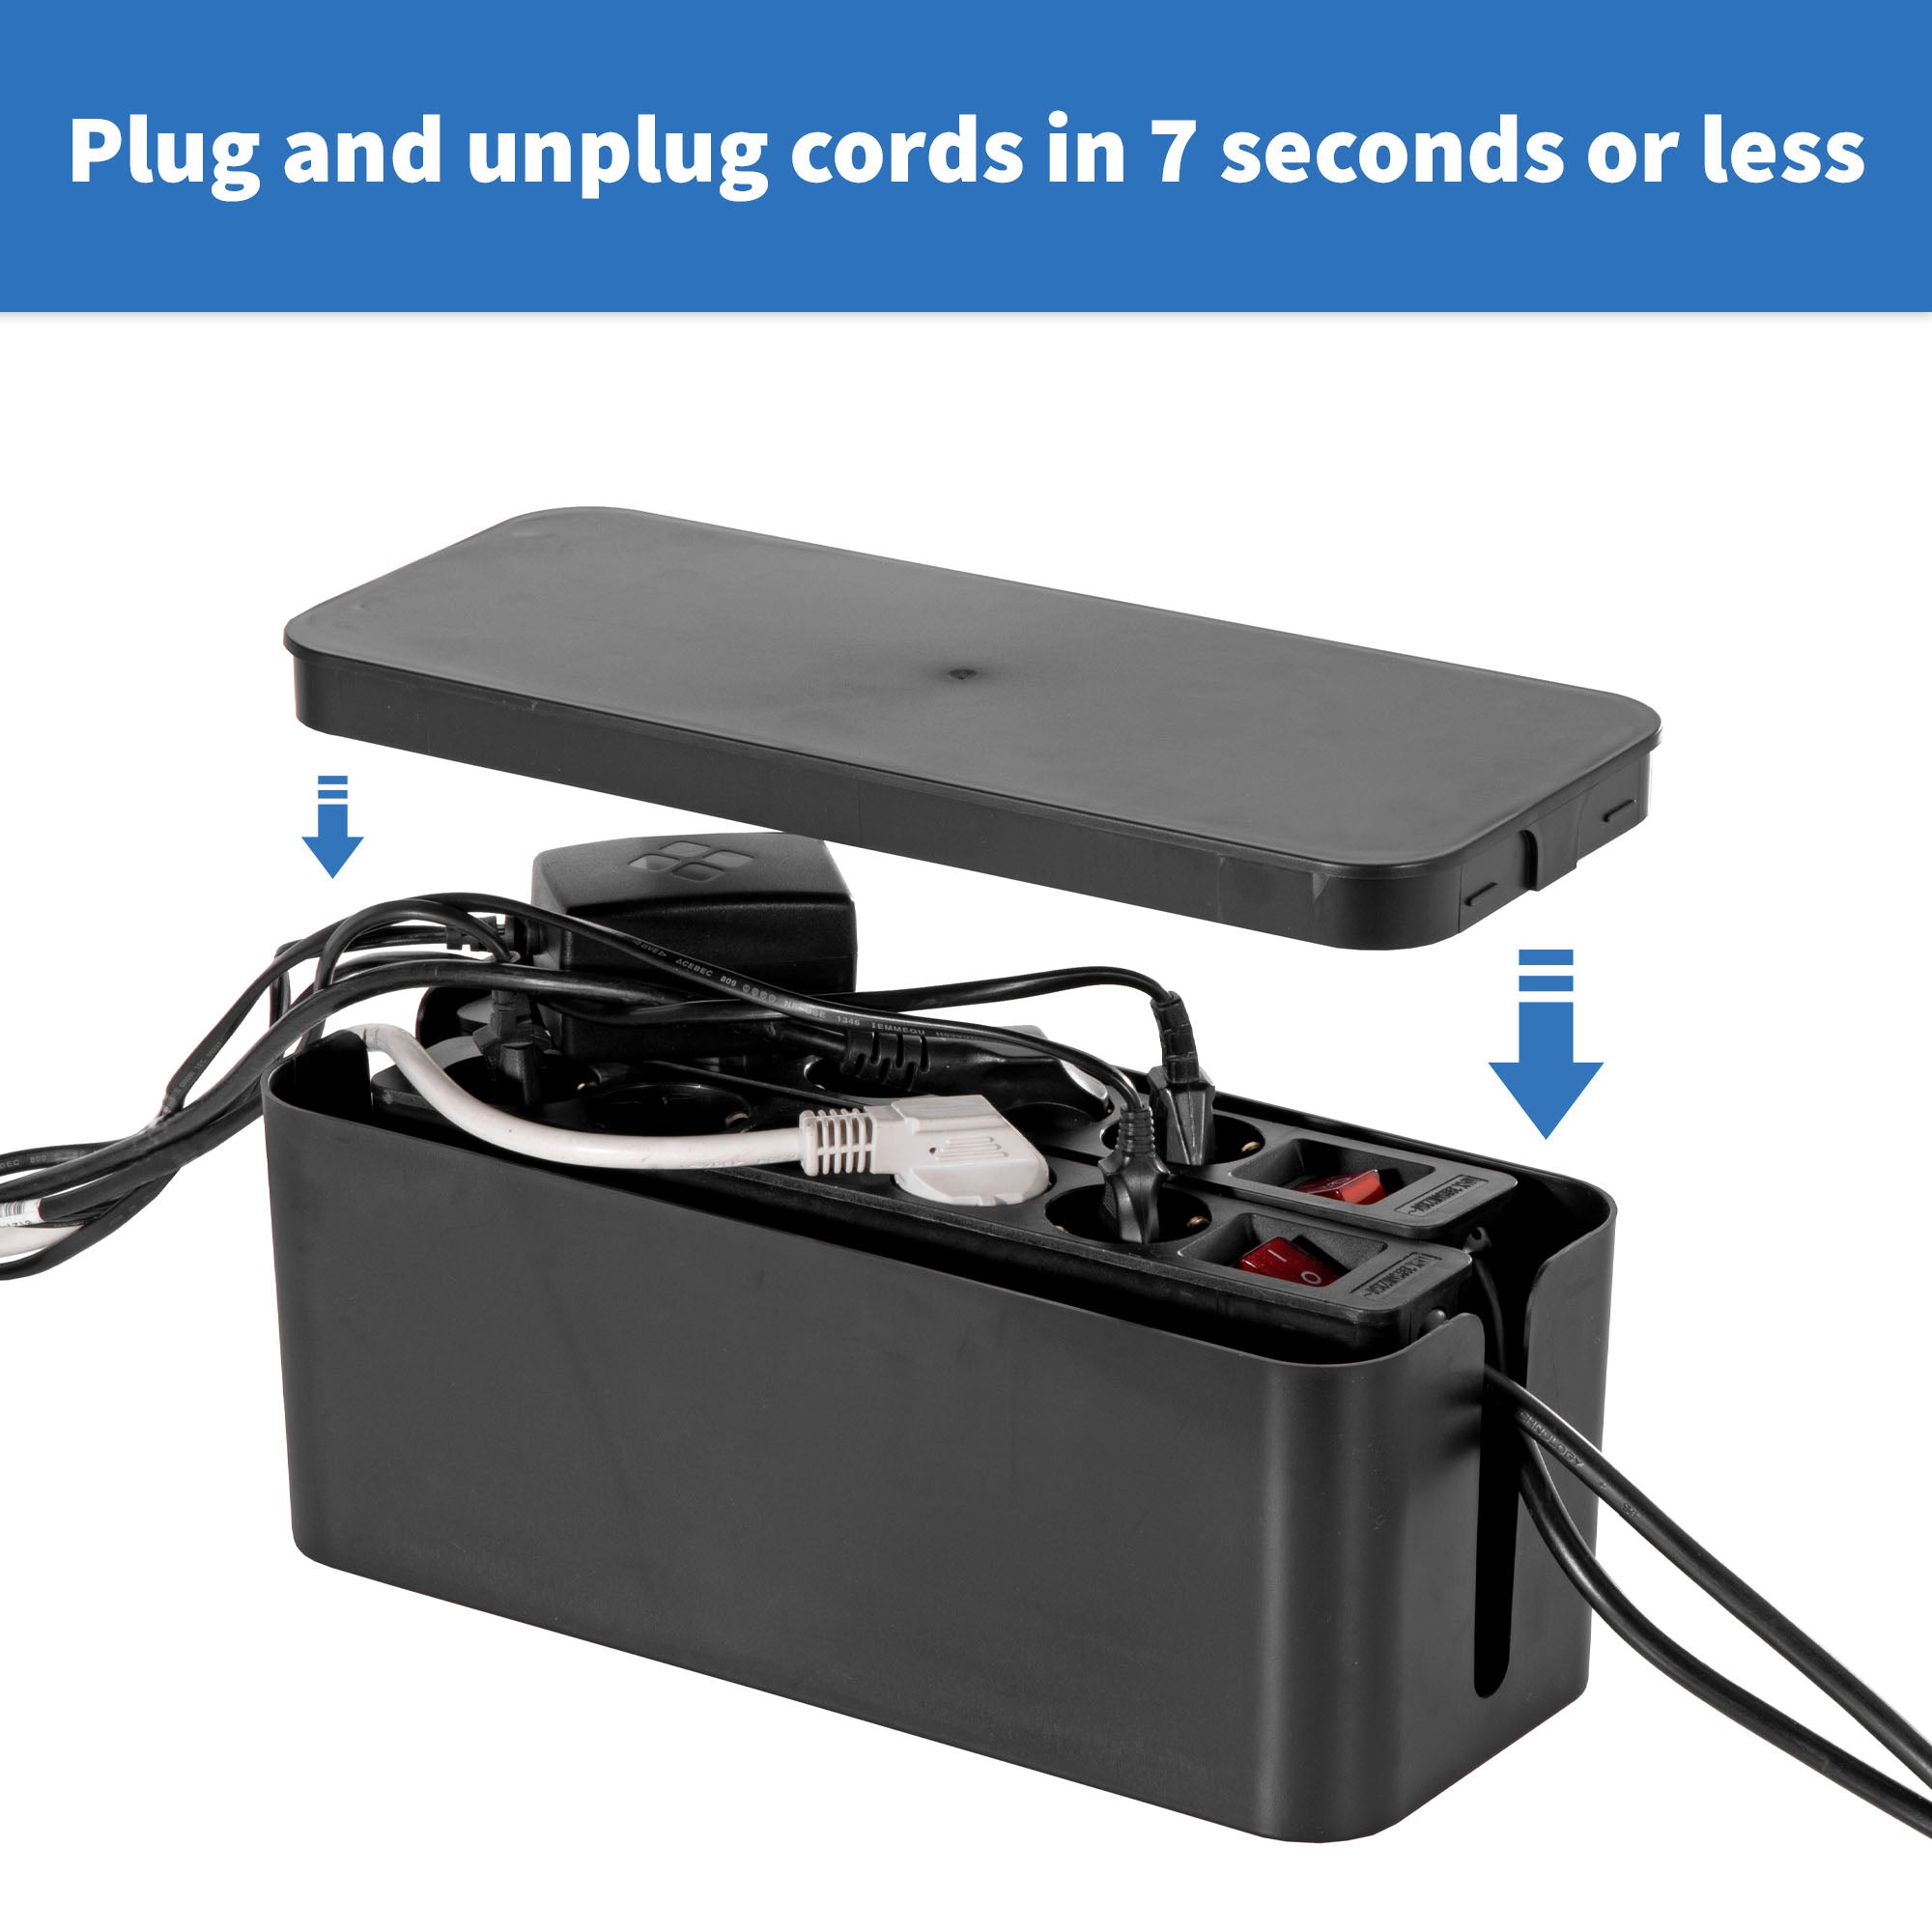 Luxe Designs Cable Management Box & Cord Organizer- Cable Organizer for Desk, Home, Office. Hides Wires, Surge Protectors, Power Strips. Eco